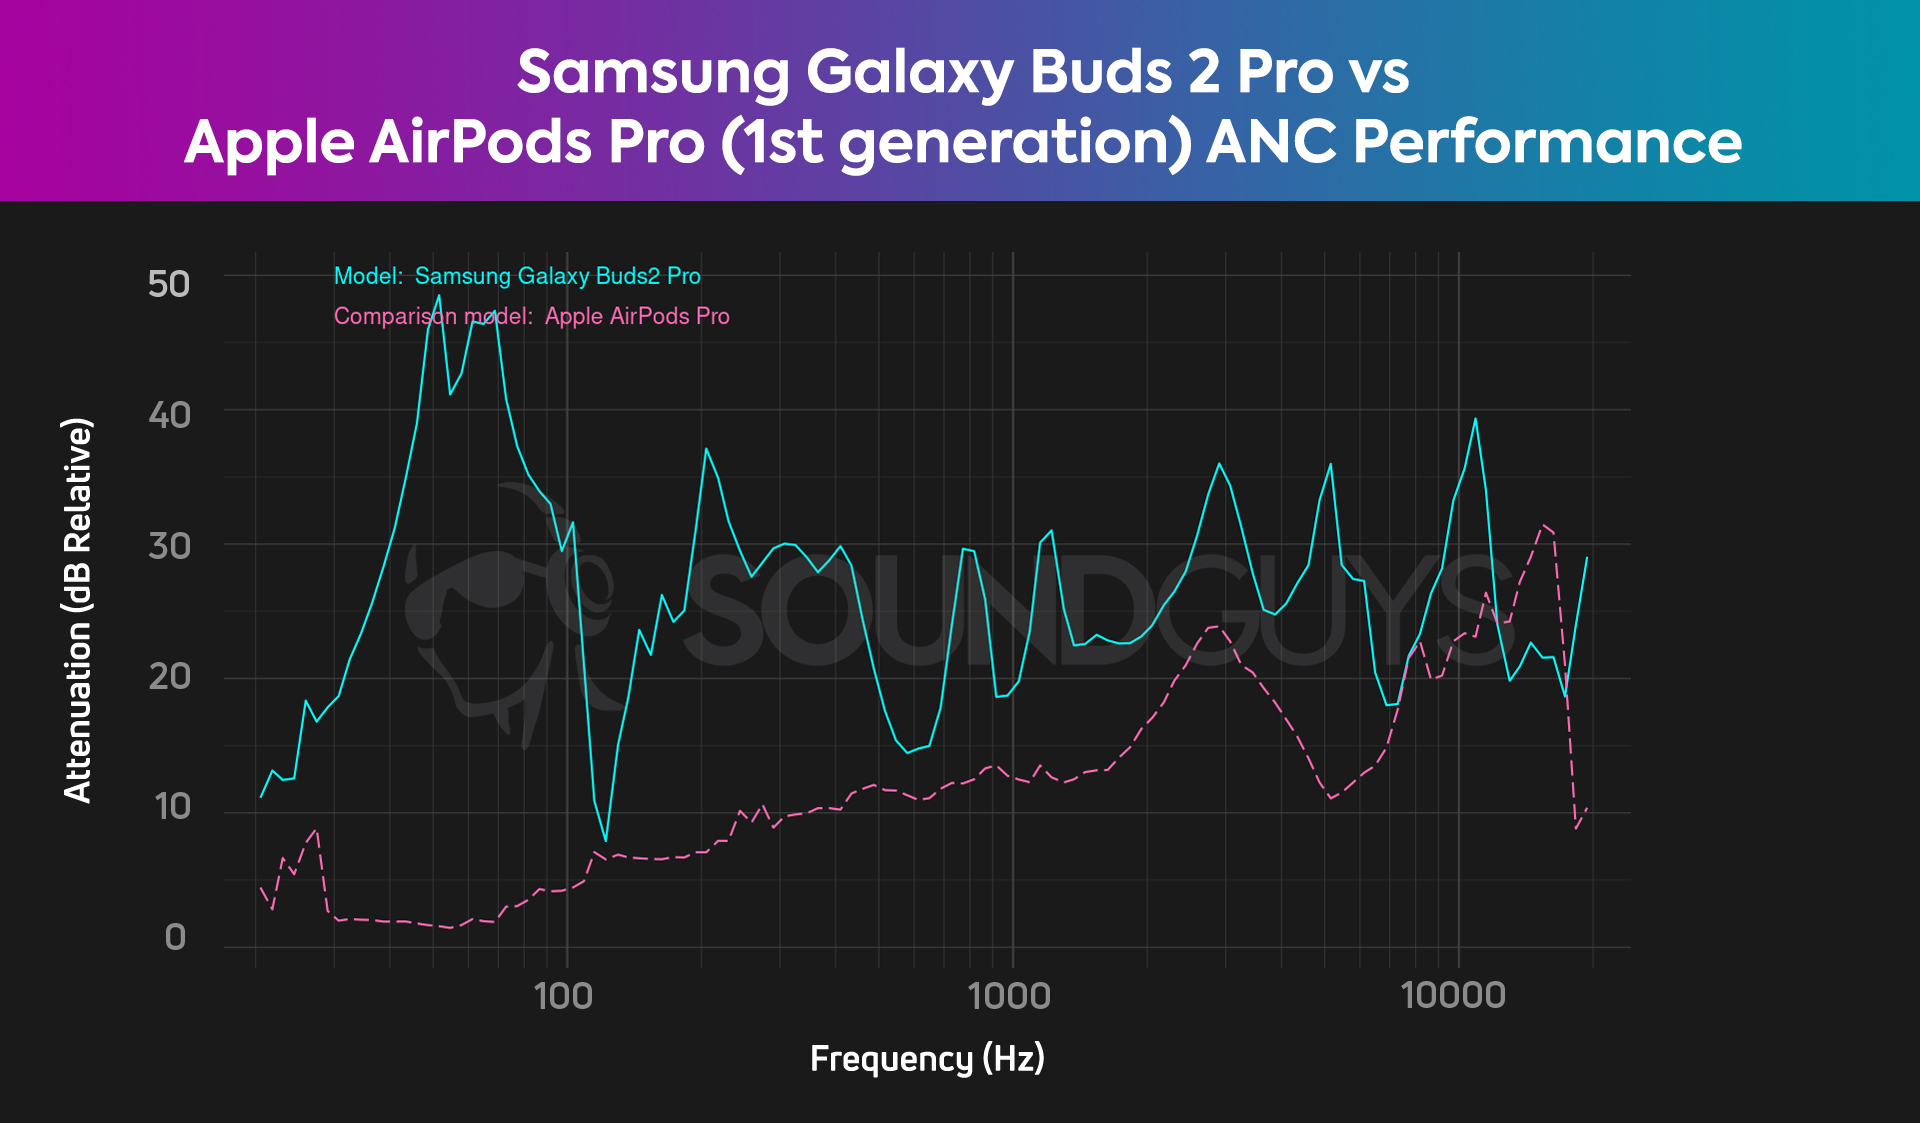 Noise canceling comparison chart for the Samsung Galaxy Buds 2 Pro and the Apple AirPods Pro, showing the superior noise canceling performance from the Galaxy Buds 2 Pro.